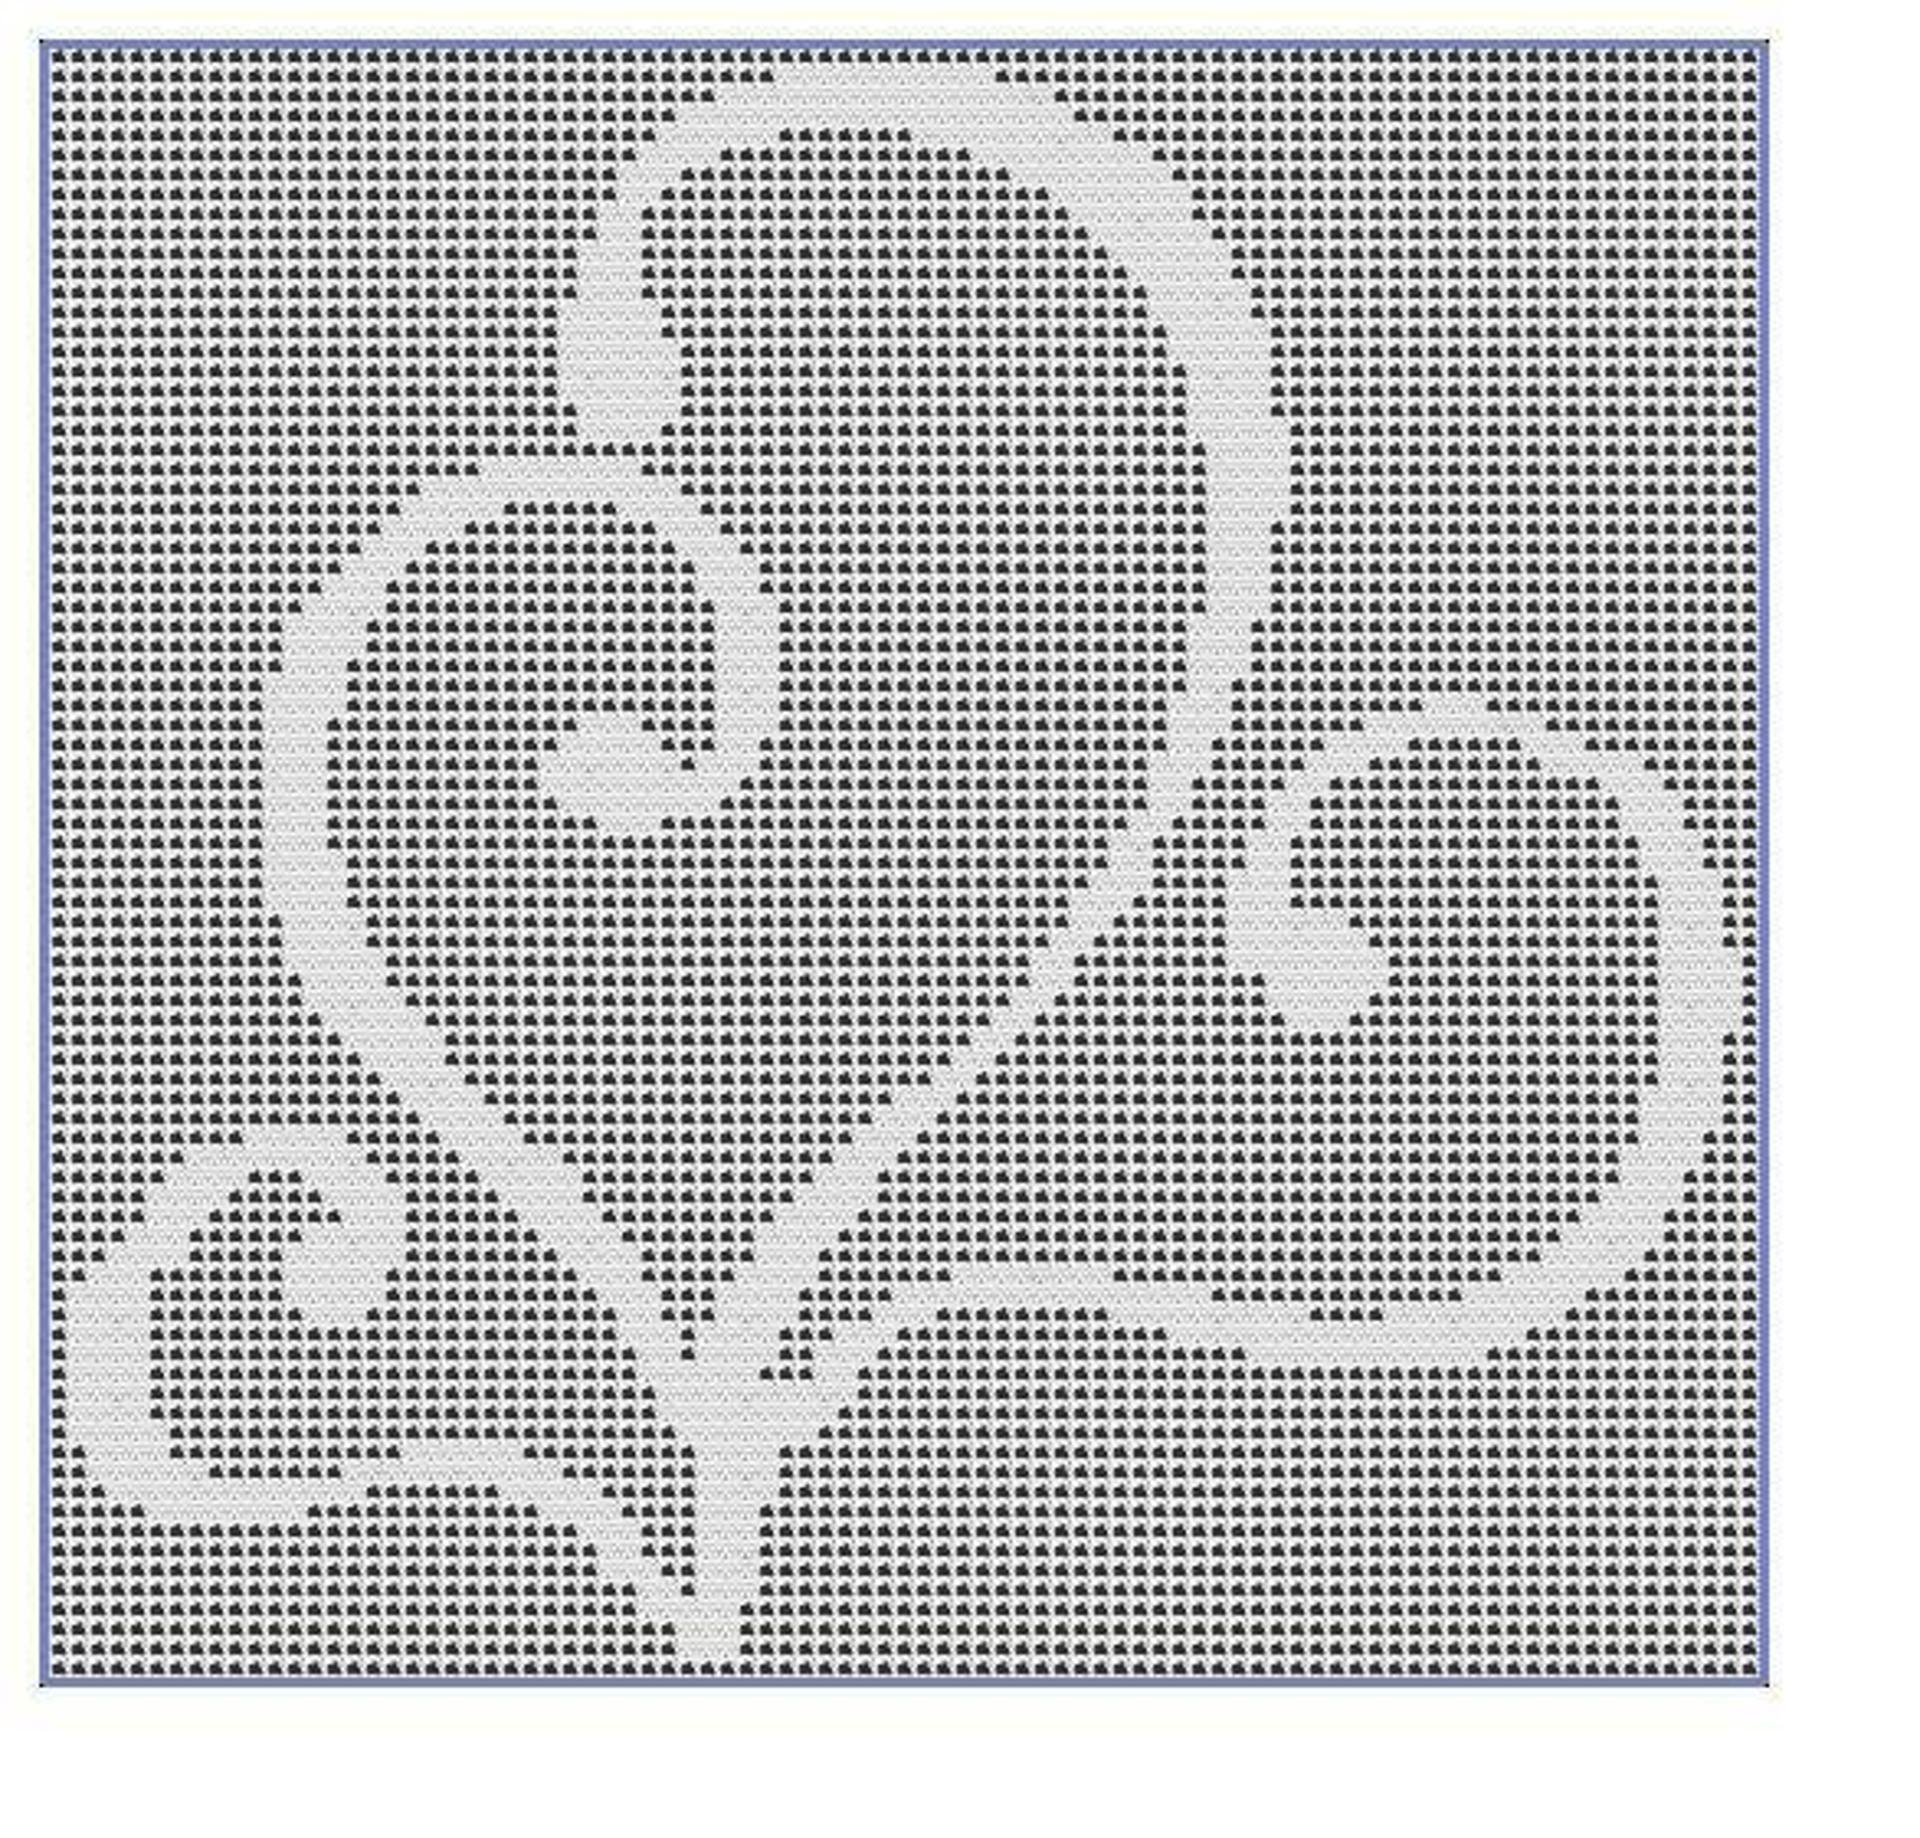 Free Filet Crochet Patterns 6 Filet Crochet Patterns To Help You Learn This Lace Technique